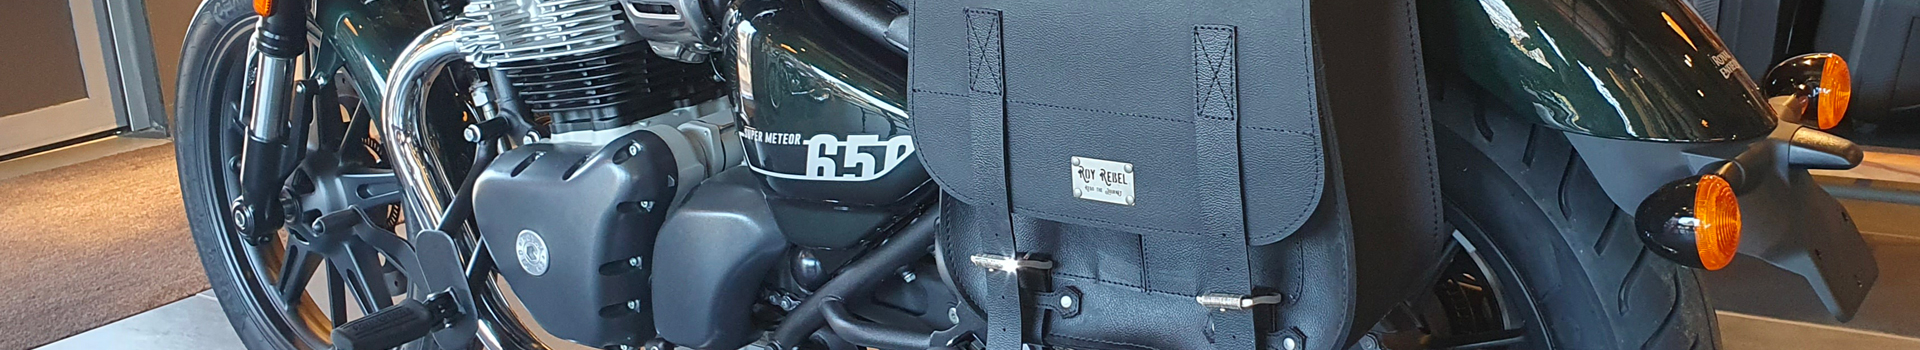 Motorcycle bag supports for Royal Enfield